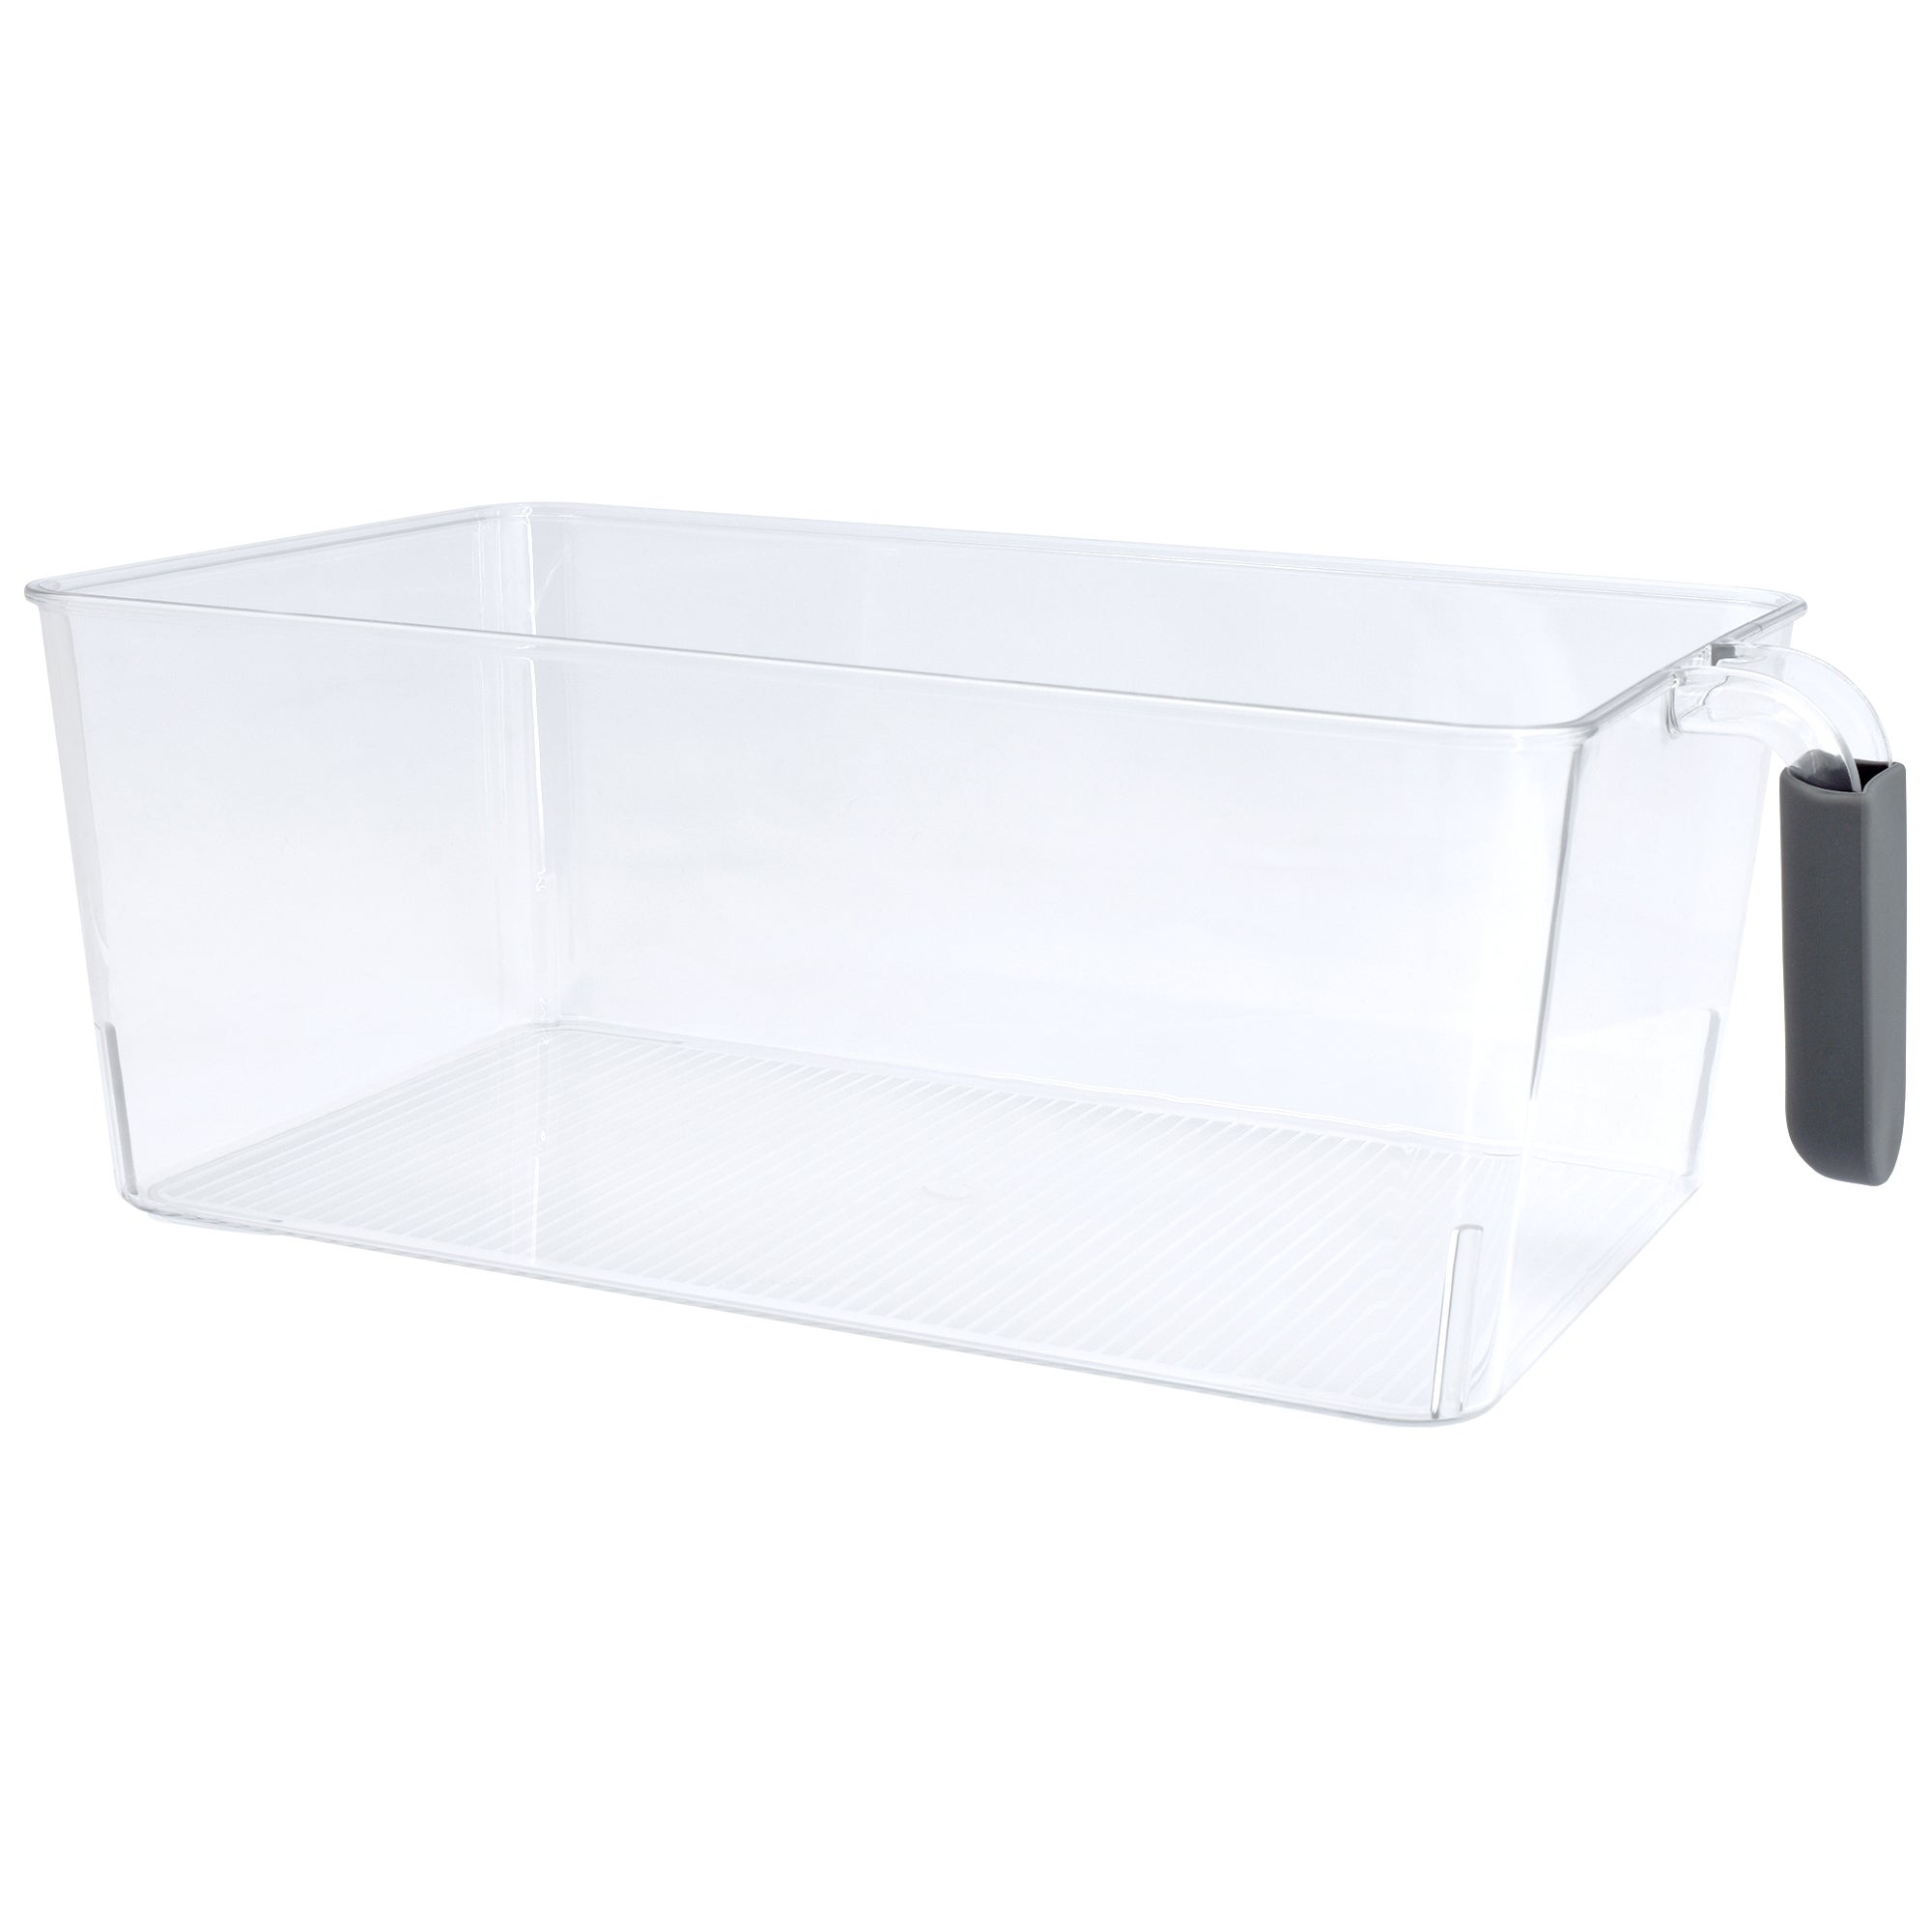 Dunelm Clear 16.5X6.9cm Large Collapsible Circular Container